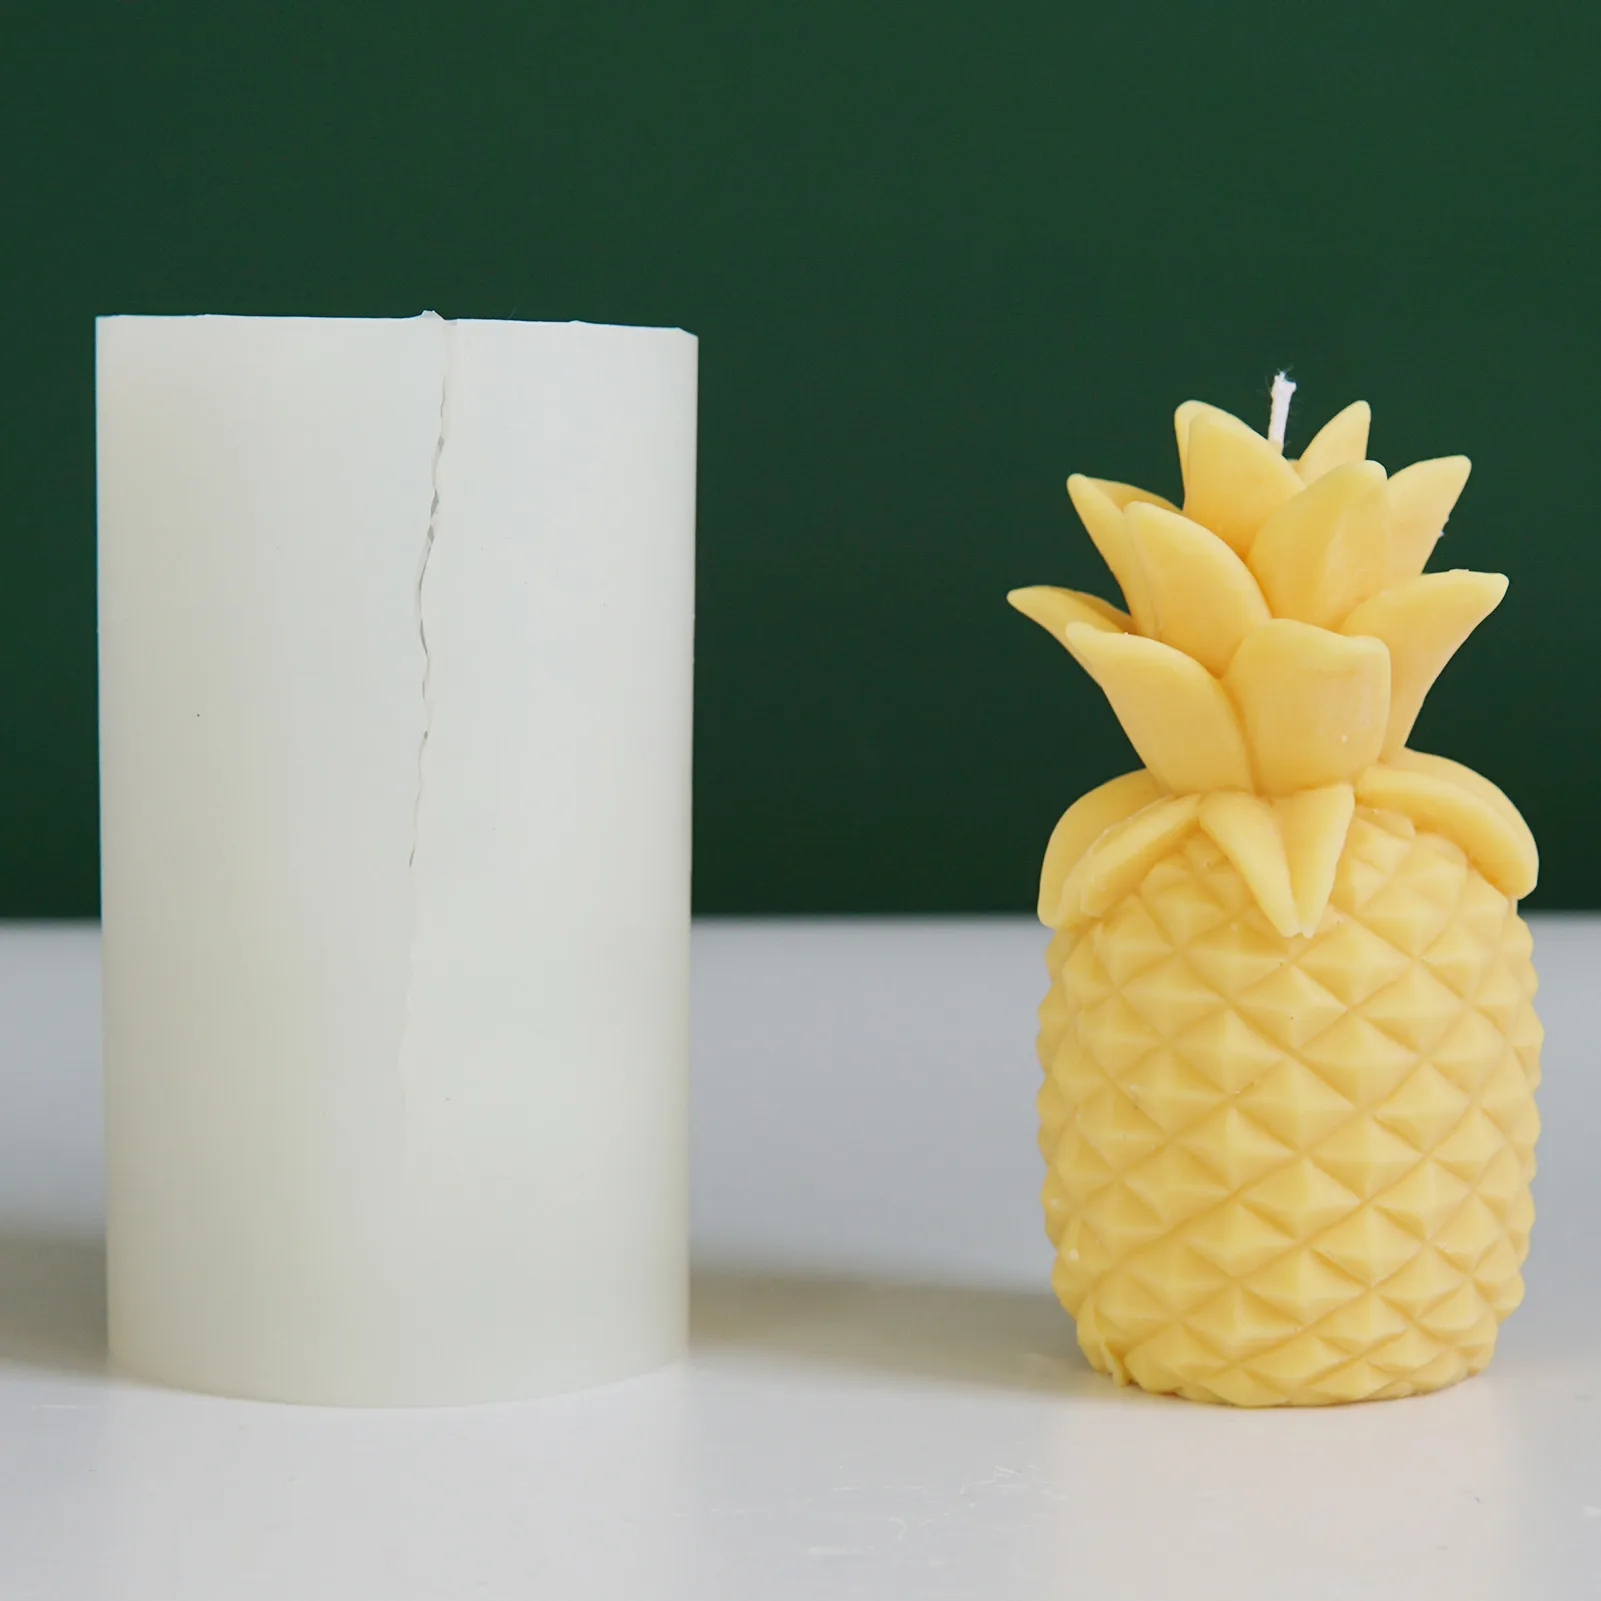 

3D Pineapple Silicone Mold Candle Cake Molds Chocolate Candy Biscuits Moulds DIY Summer Party Cake Decorating Baking Tool